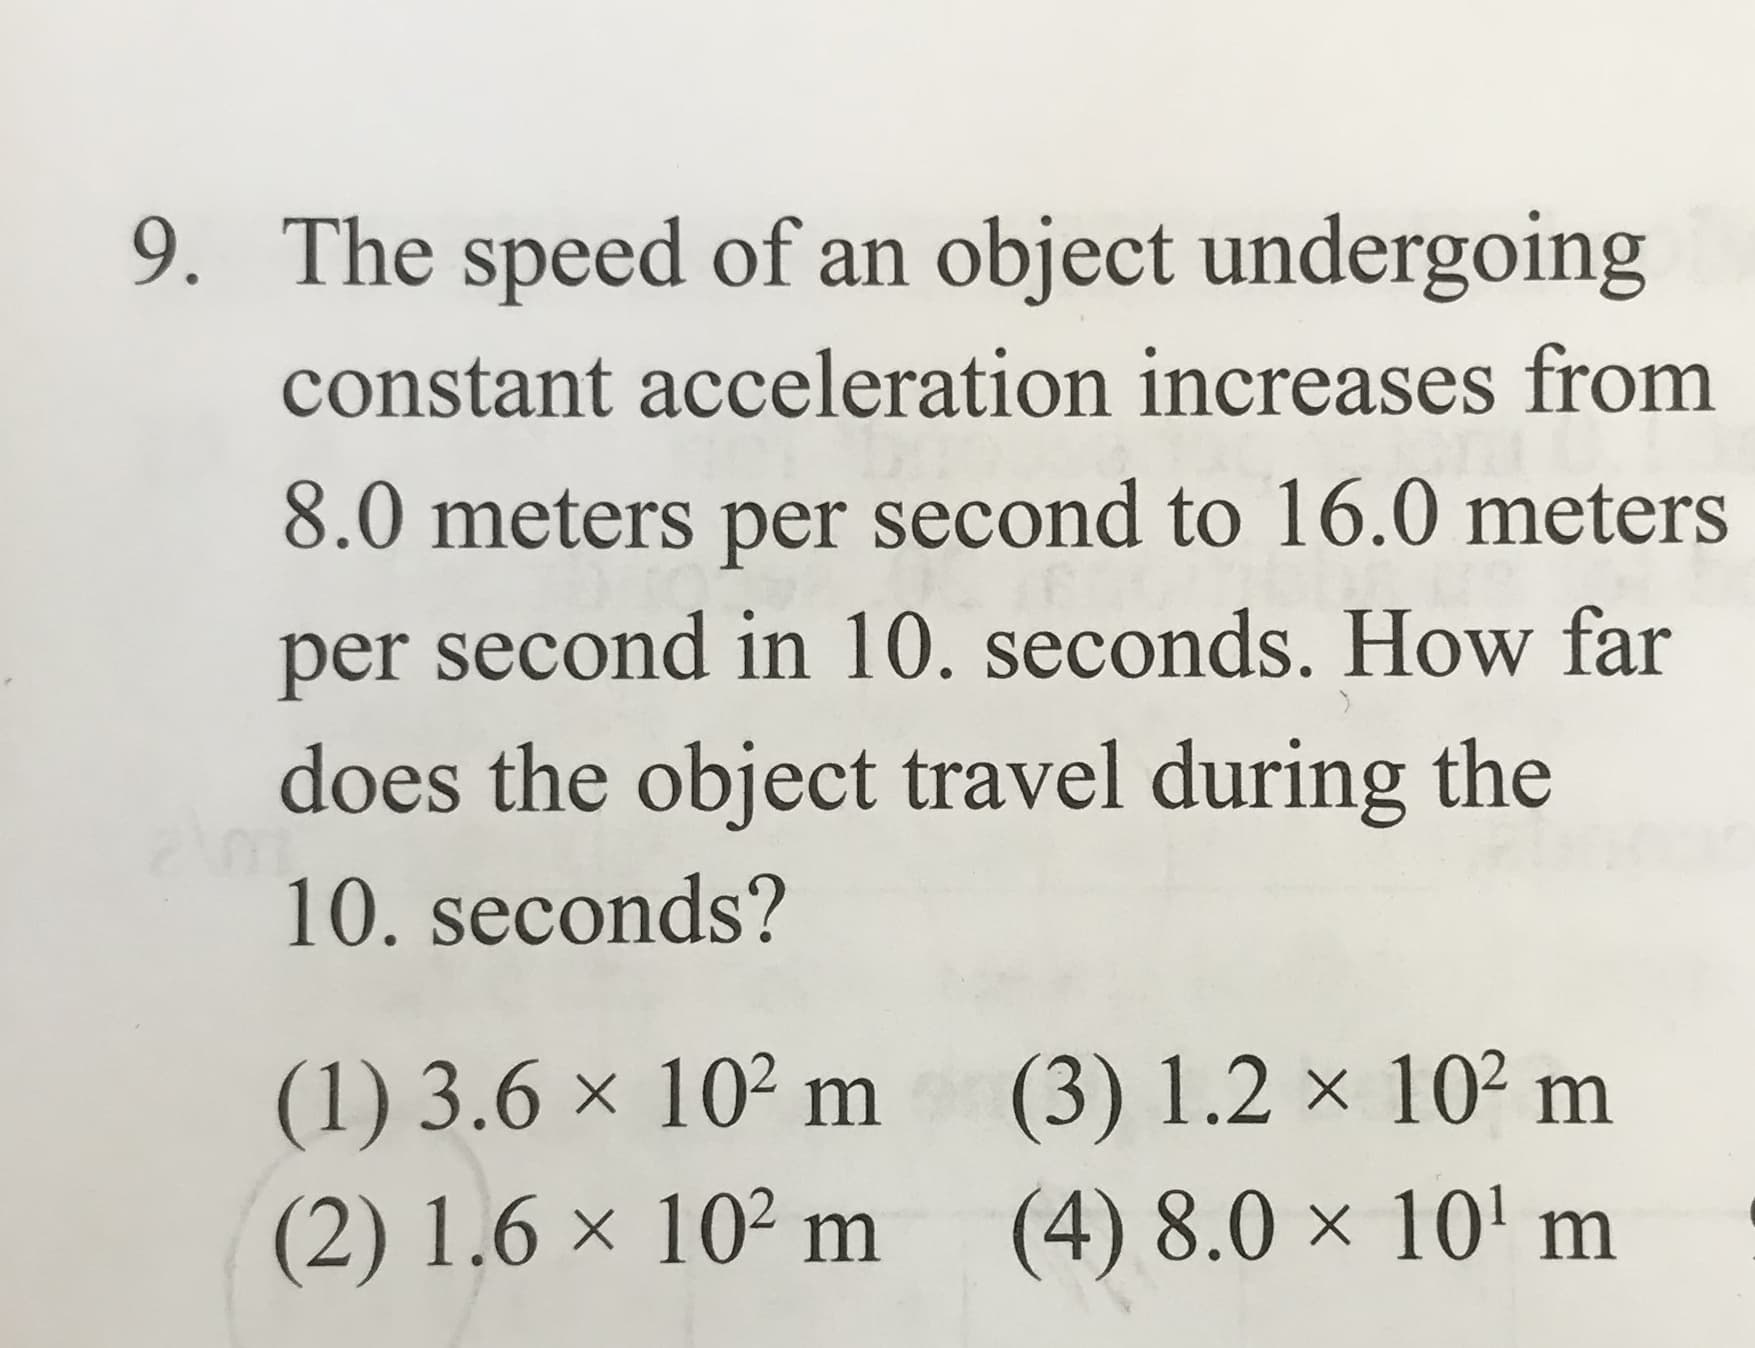 The speed of an object undergoing
9.
constant acceleration increases from
8.0 meters per second to 16.0 meters
per second in 10. seconds. How far
does the object travel during the
10. seconds?
(1) 3.6 x 102 m
(2) 1.6 x 102 m
(3) 1.2 x 102 m
(4) 8.0 x 10 m
